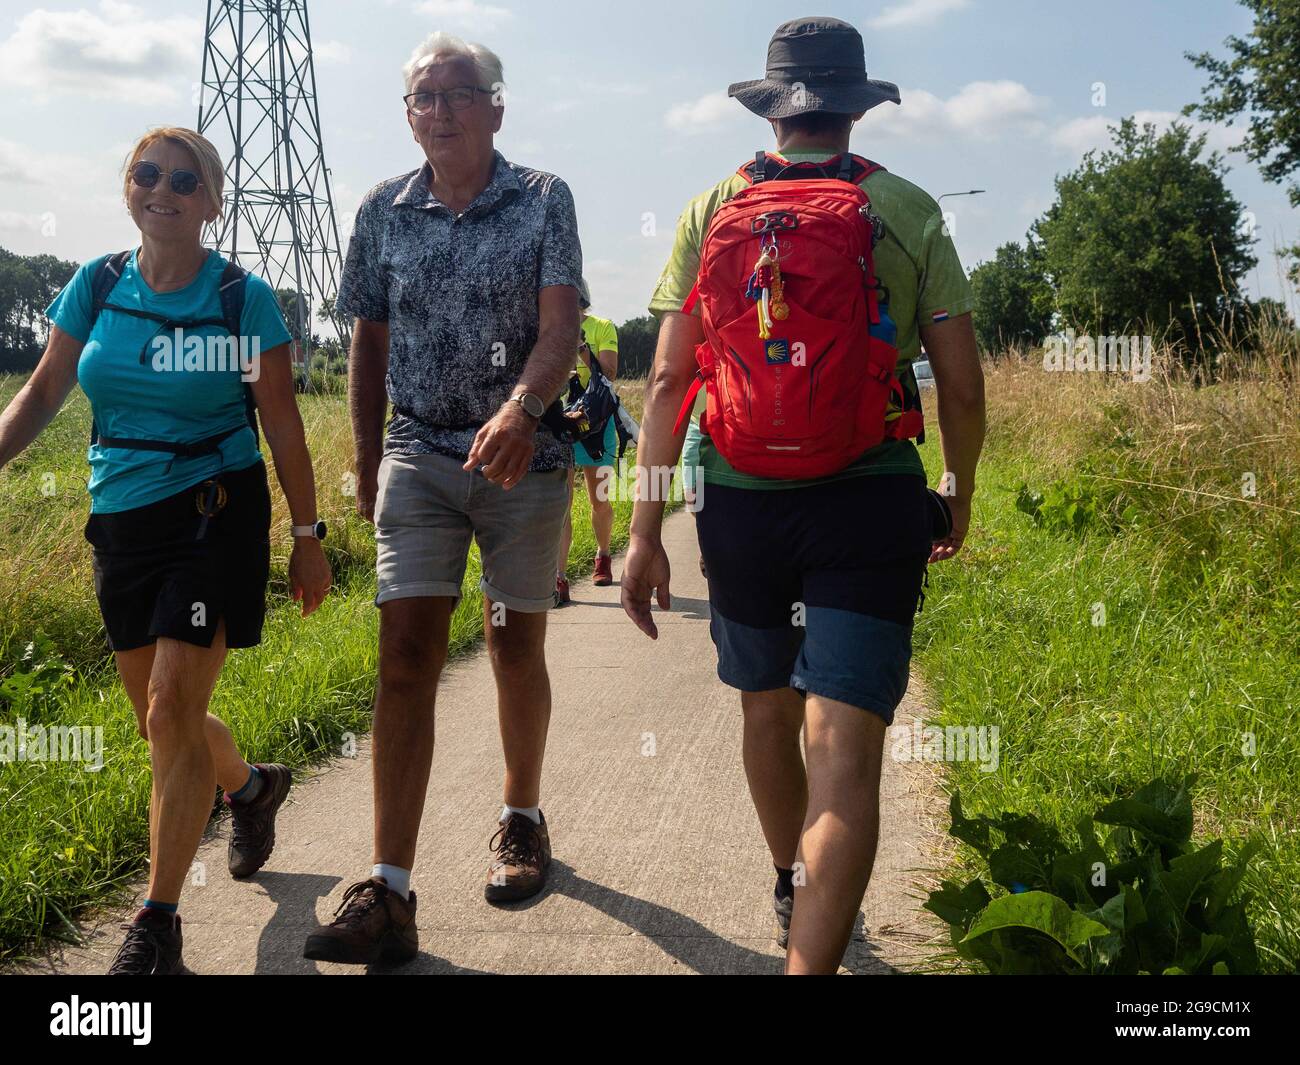 July 20, 2021, Nijmegen, Netherlands: Participants seen walking during the event.The Vierdaagse, also known as The International Four Days Marches, the largest multi-day walking event in the world that would be celebrated each year, but due to the current health situation, for the second year in a row, the event was canceled. However, the KWBN (Koninklijke Wandel Bond Nederland) organized the 'Alternative Vierdaagse', to which everybody could join, choosing a distance between 10 and 50 km, and a route somewhere in the Netherlands. Participation in the Alternative Four Days Marches is free. En Stock Photo